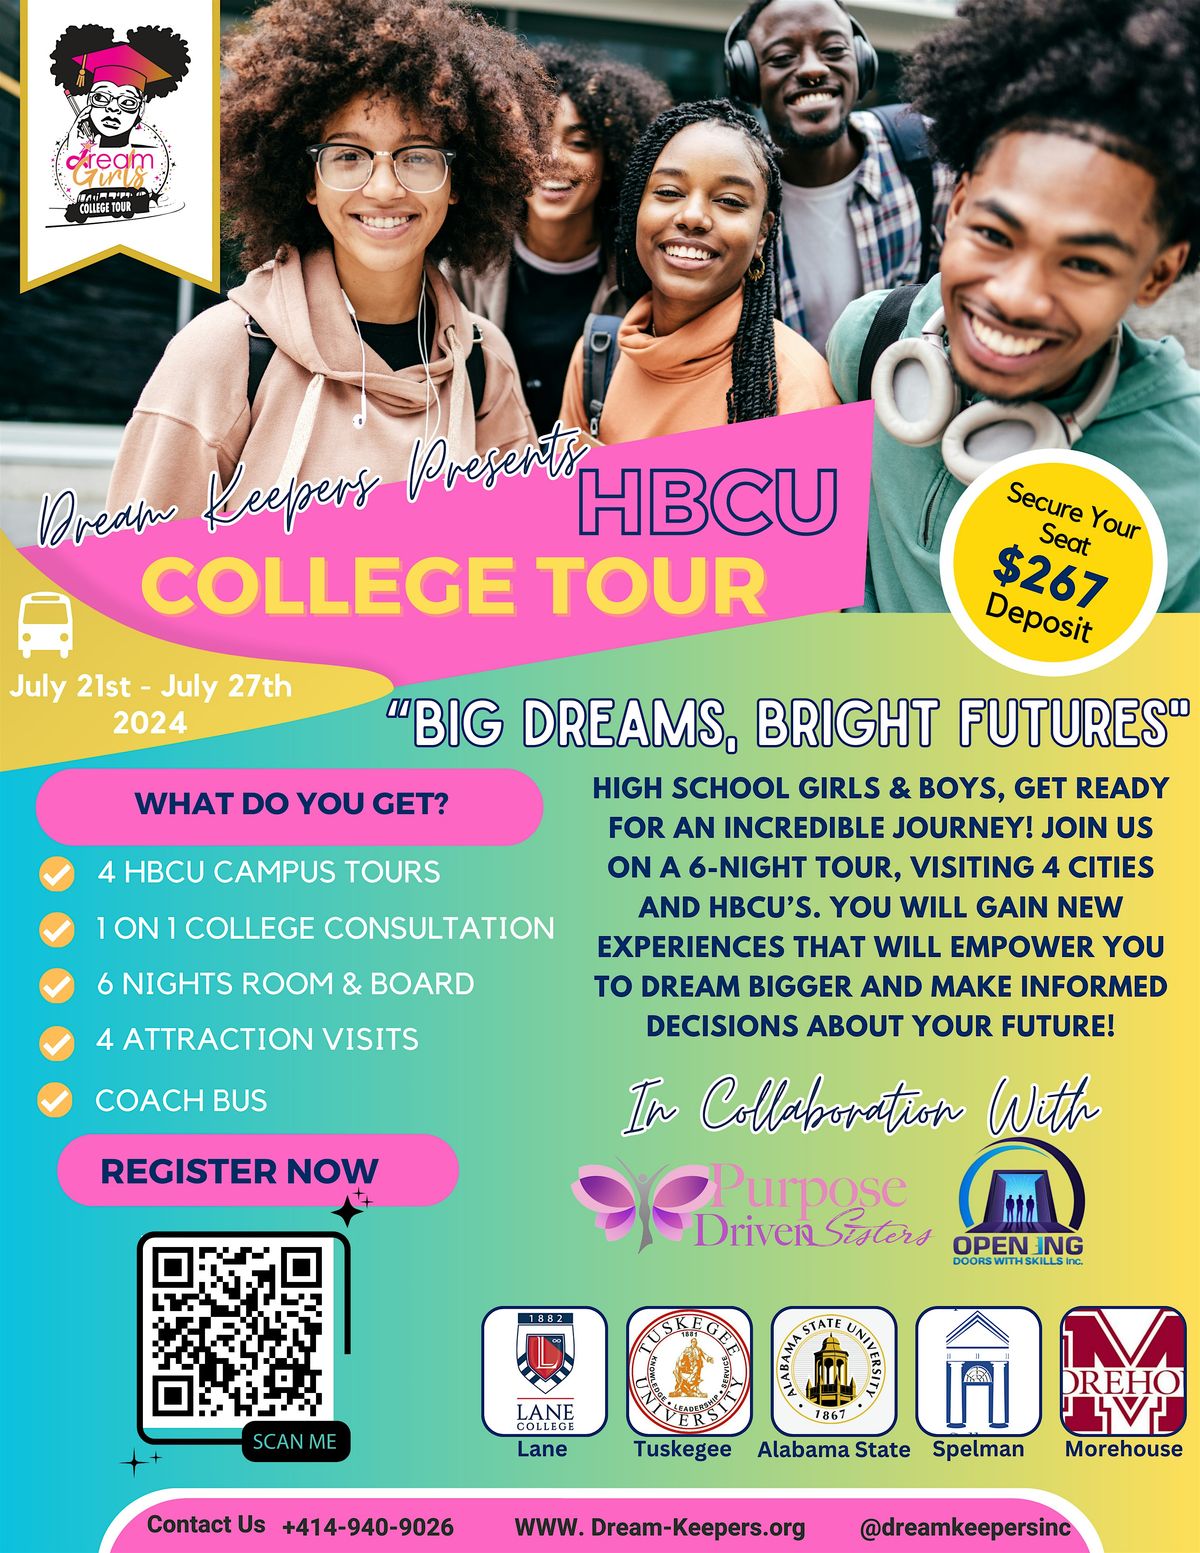 Dream Keepers HBCU College Tour